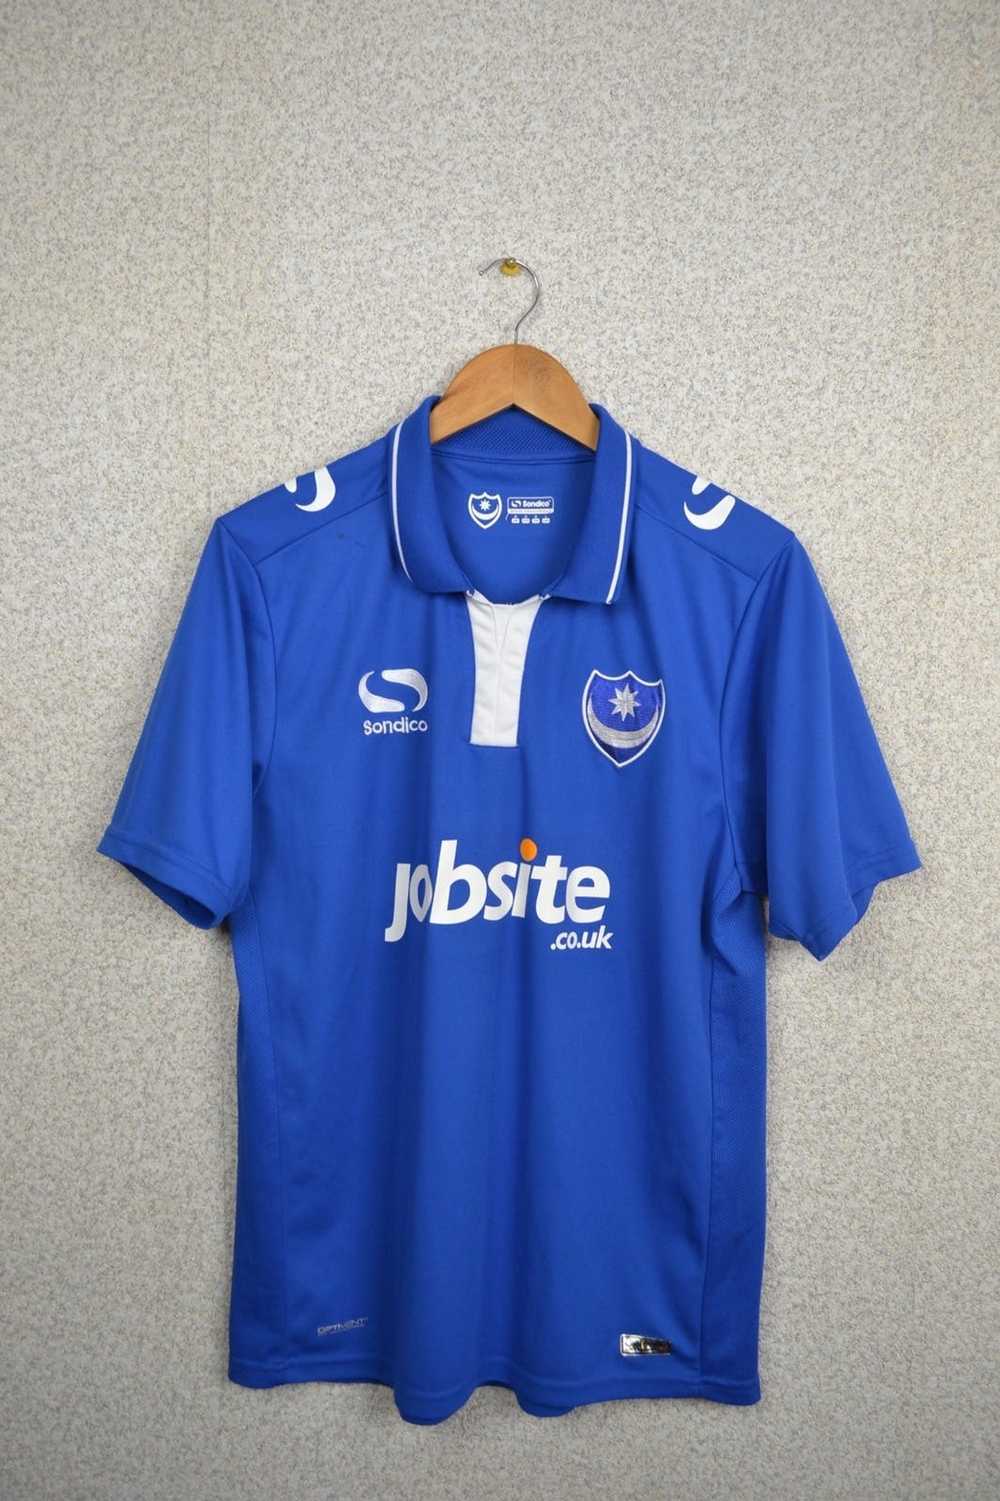 Other × Soccer Jersey PORTSMOUTH 2016 HOME FOOTBA… - image 1